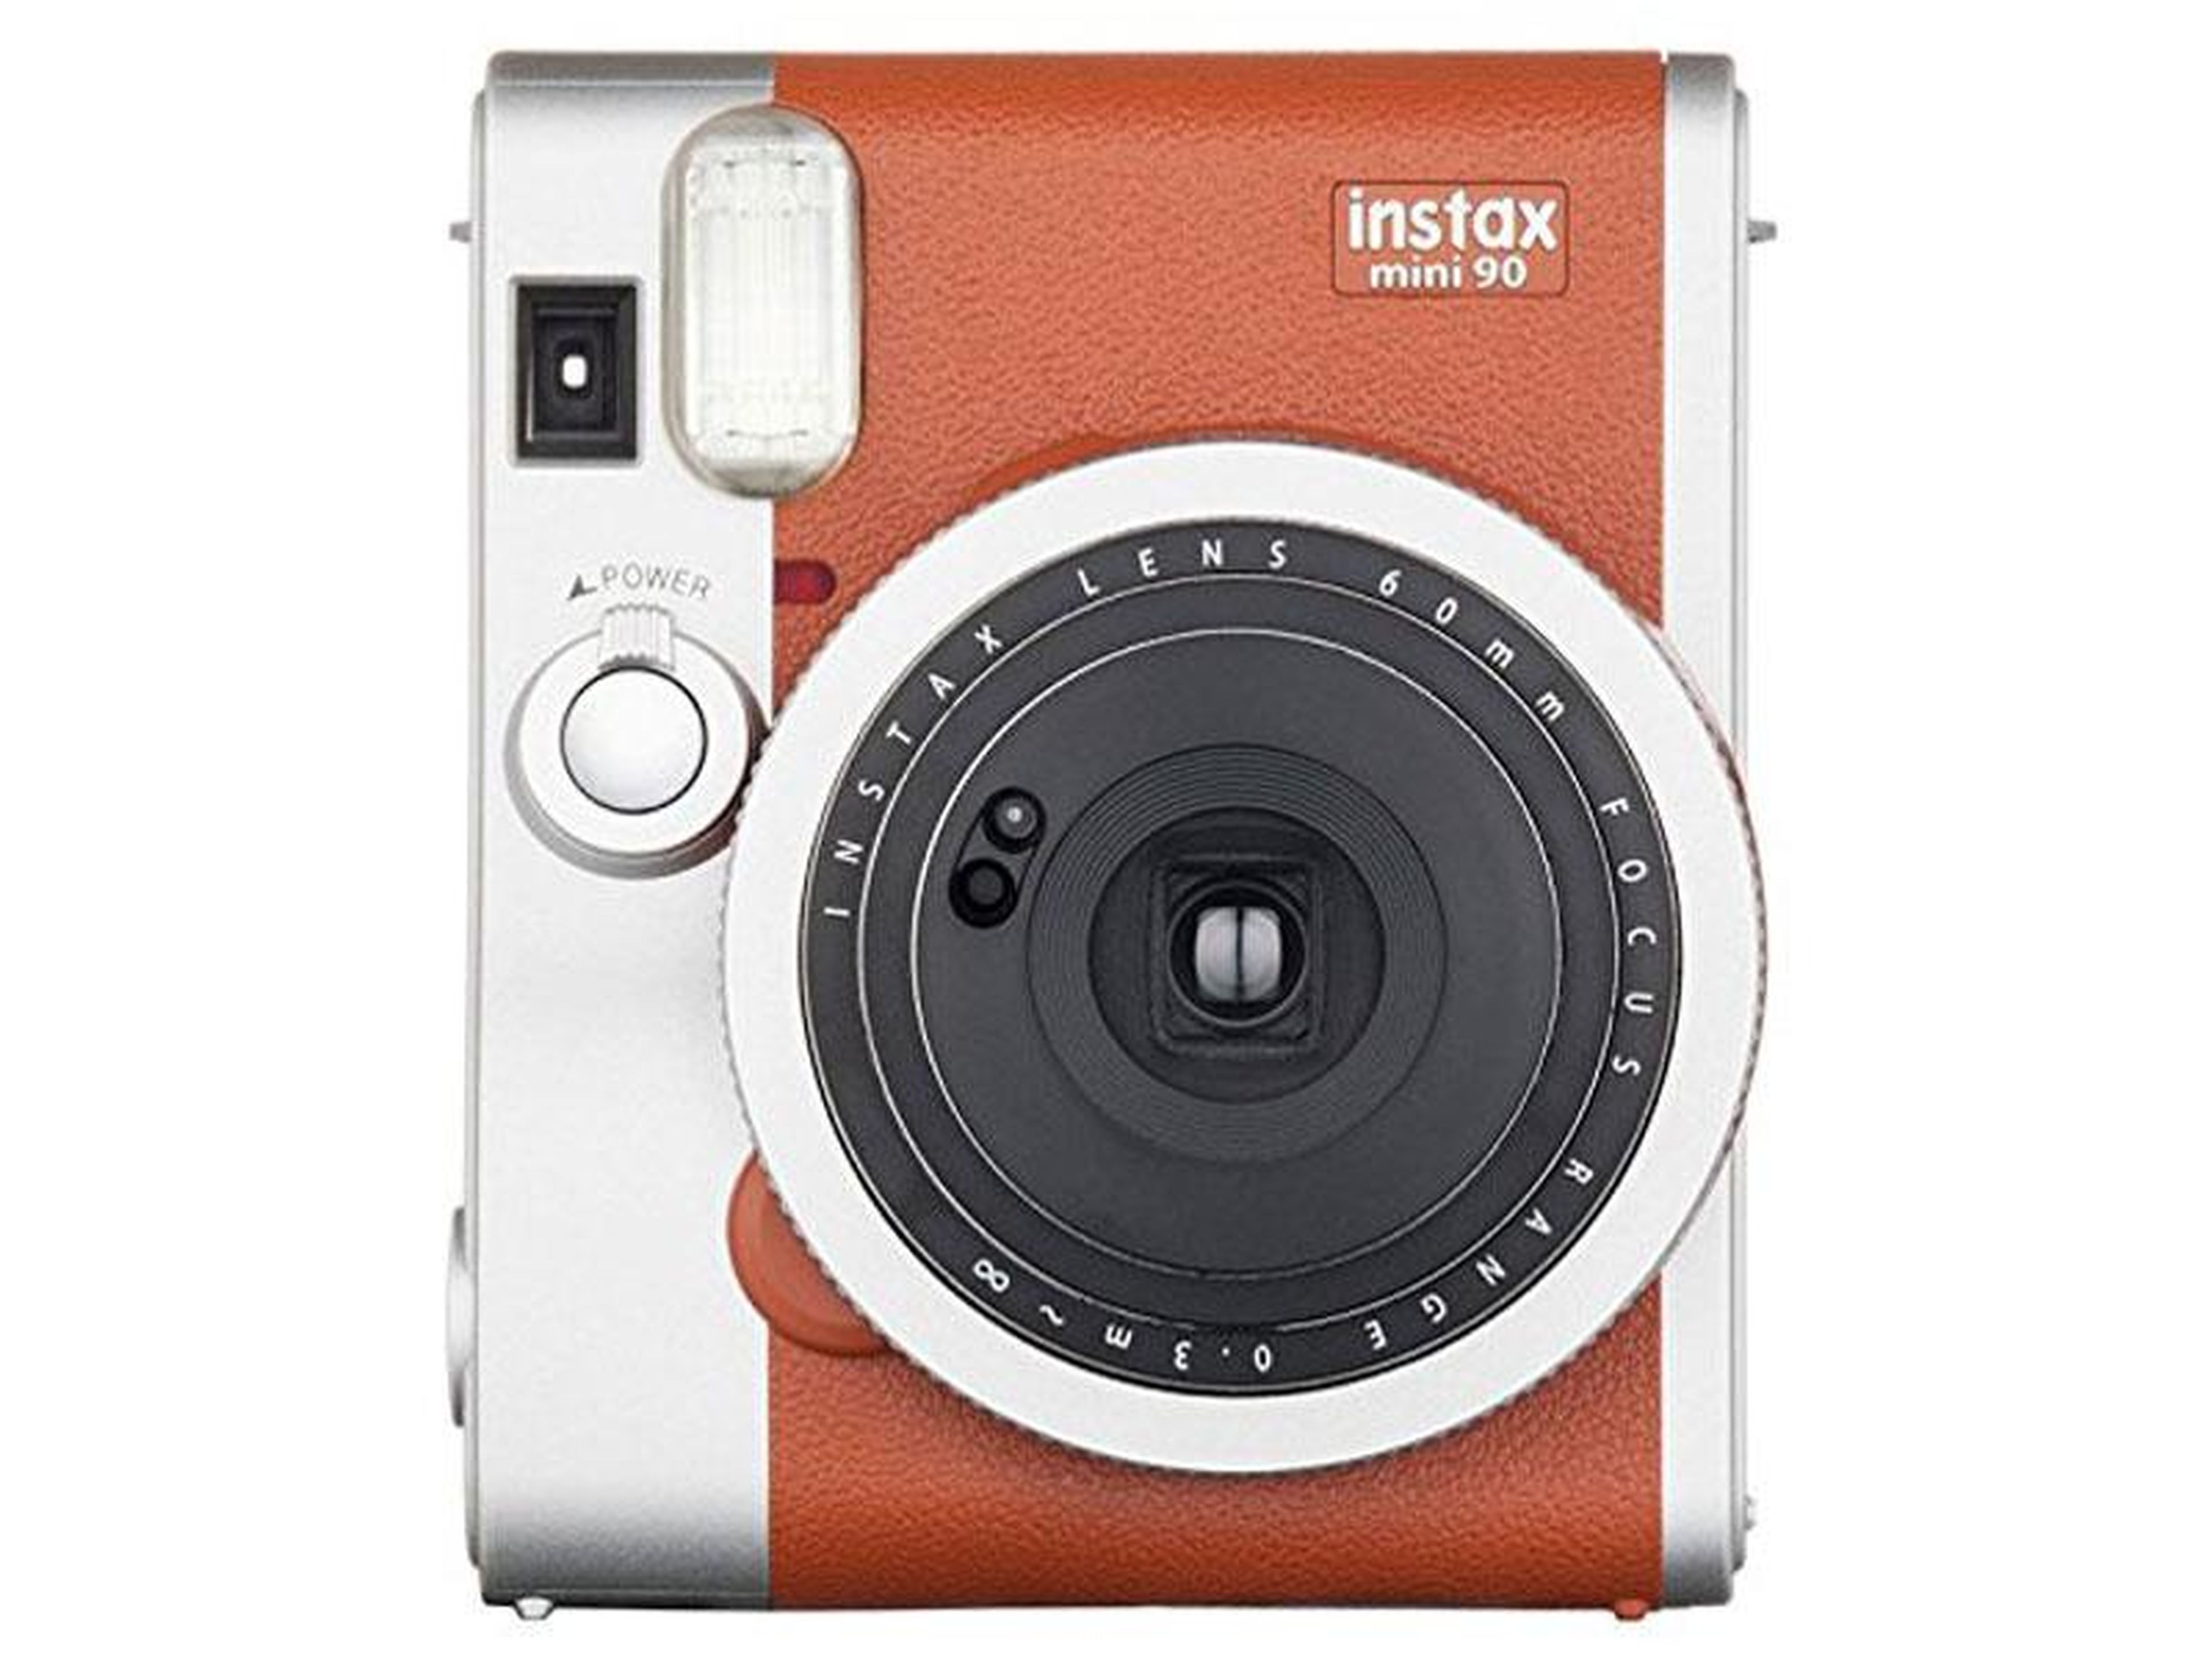 An advanced instant camera